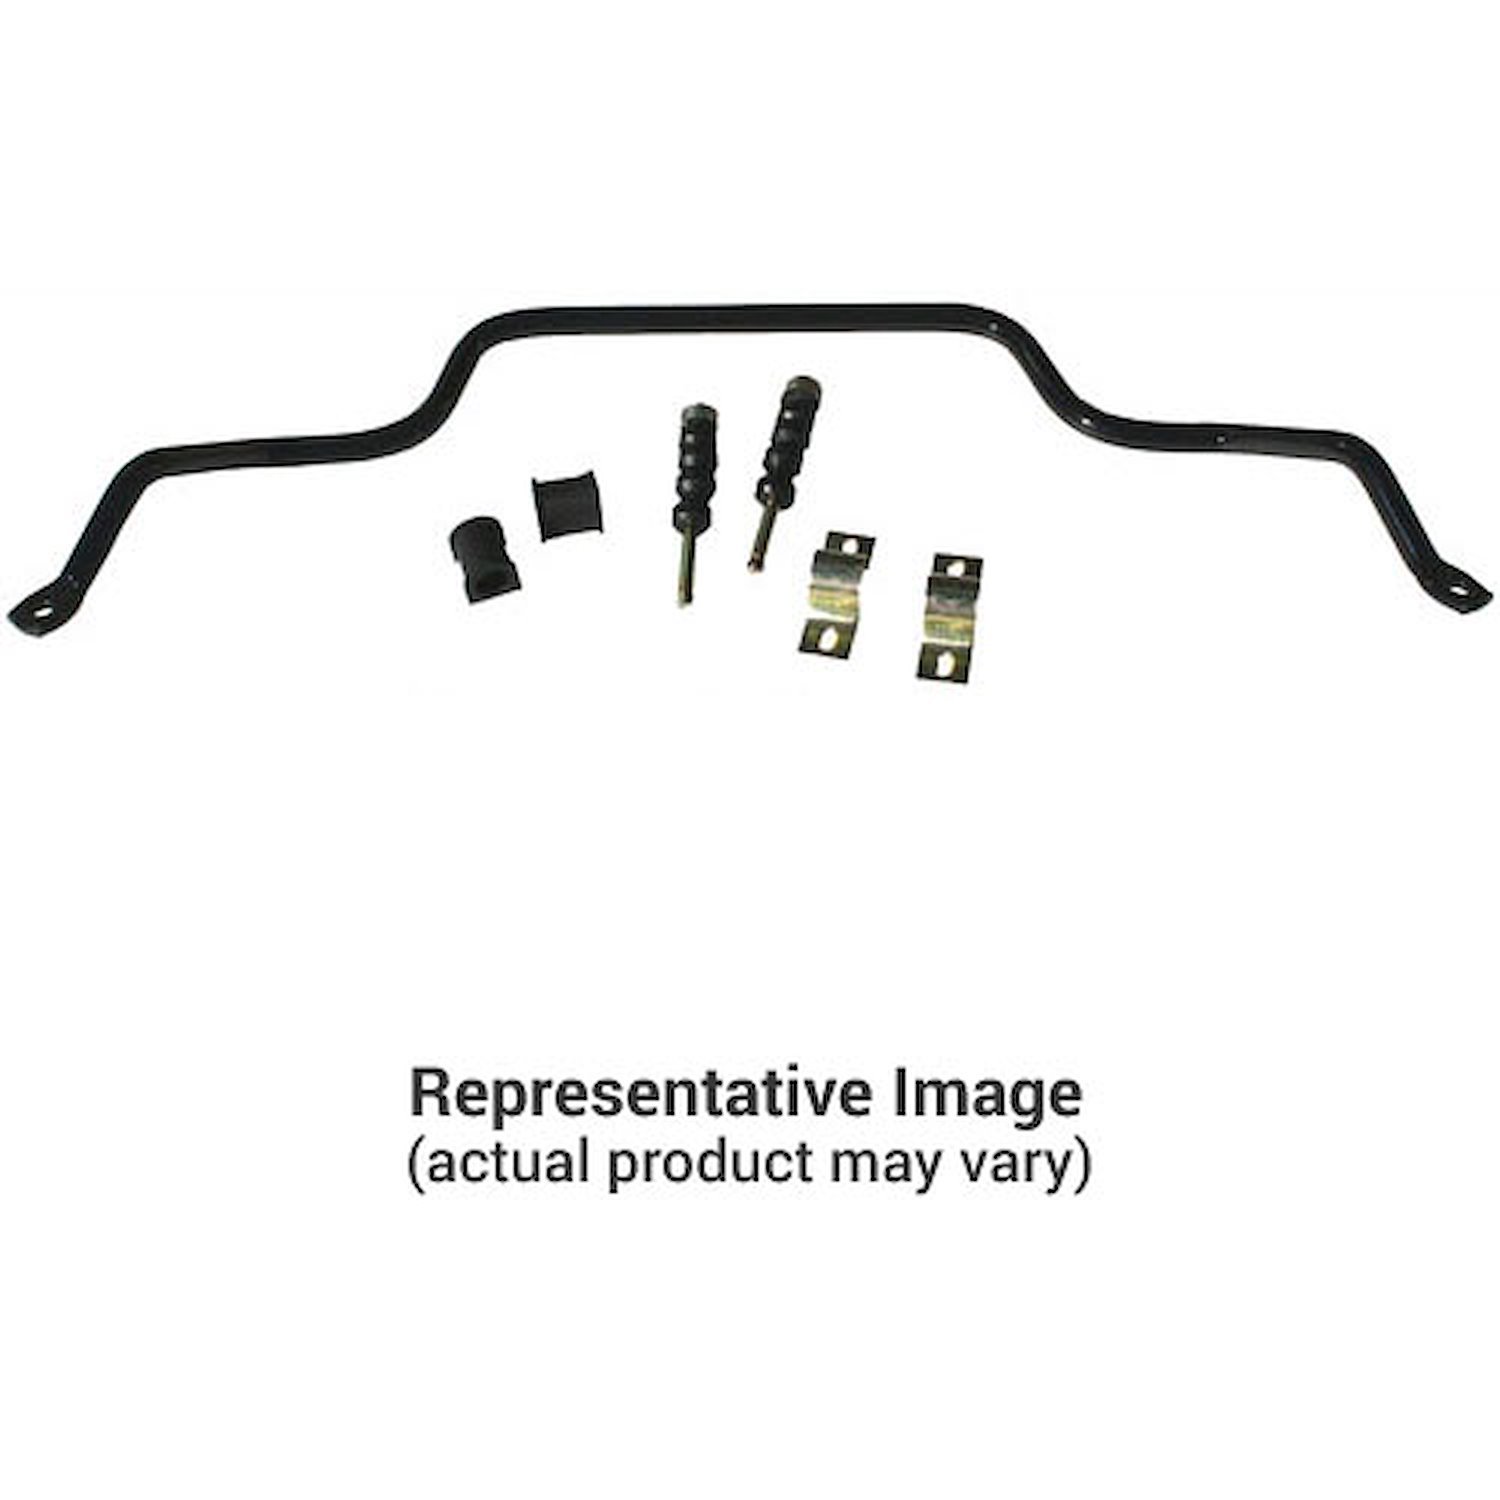 1 1/8" Front Sway Bar 2005-07 Ford F250 2WD/4WD